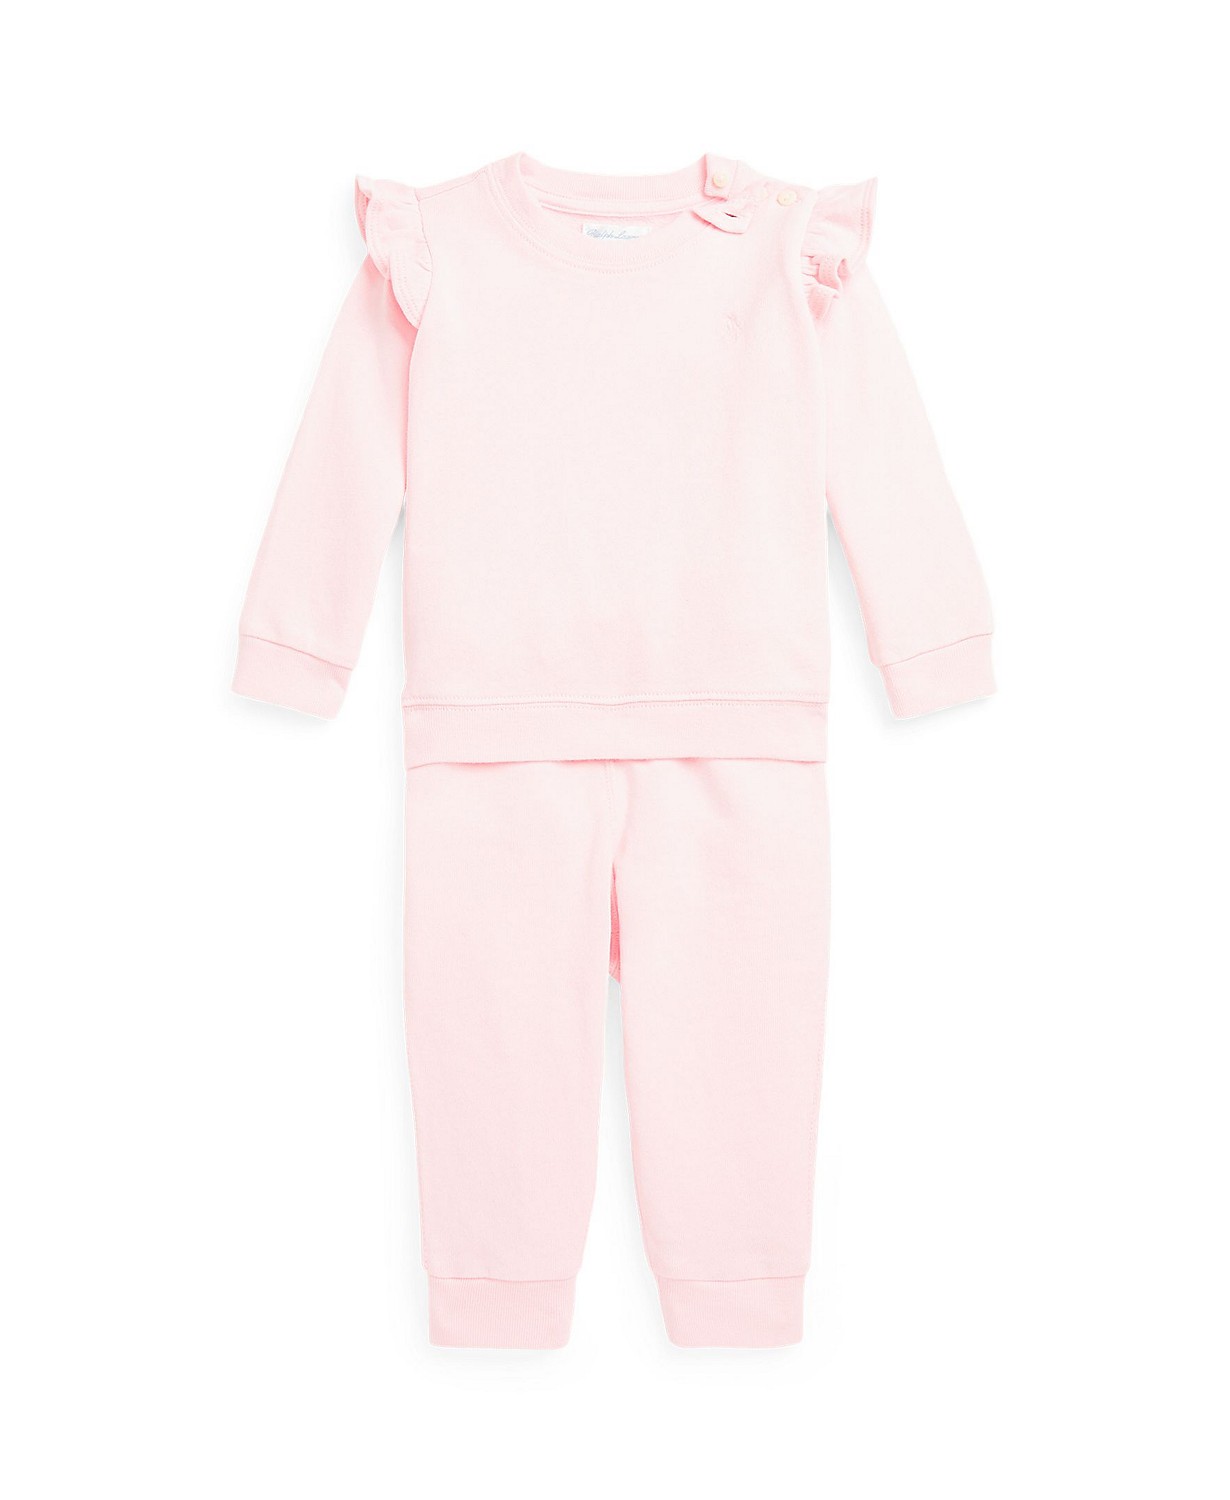 Baby Girls Ruffled French Terry Top and Pant, 2 Piece Set